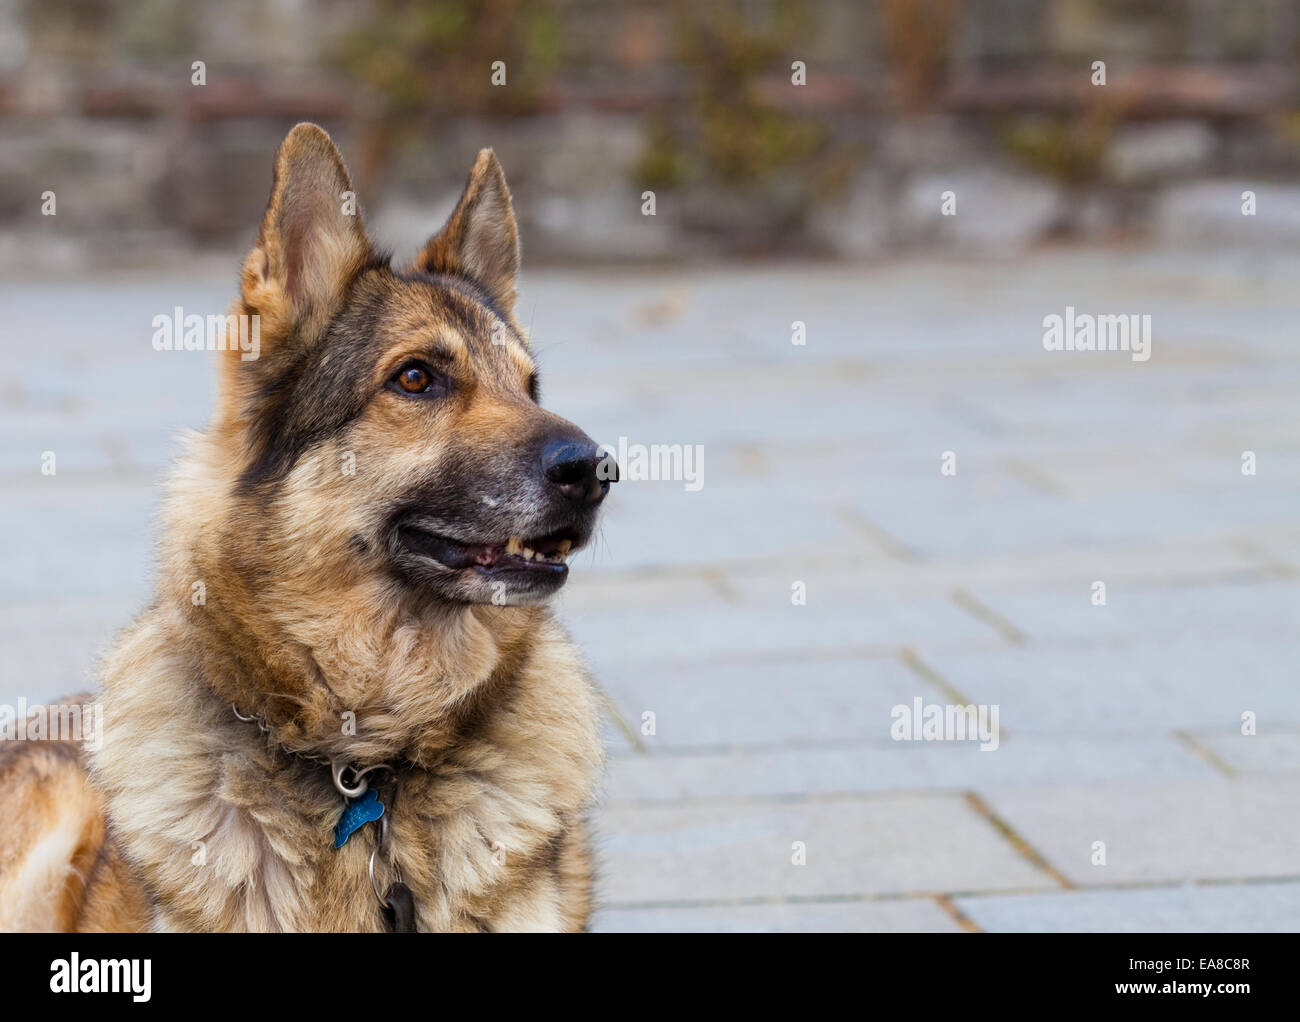 German Shepherd Dog looking intently out of the frame at his owner.  Taken against a grey stone background. The dog is wearing a Stock Photo